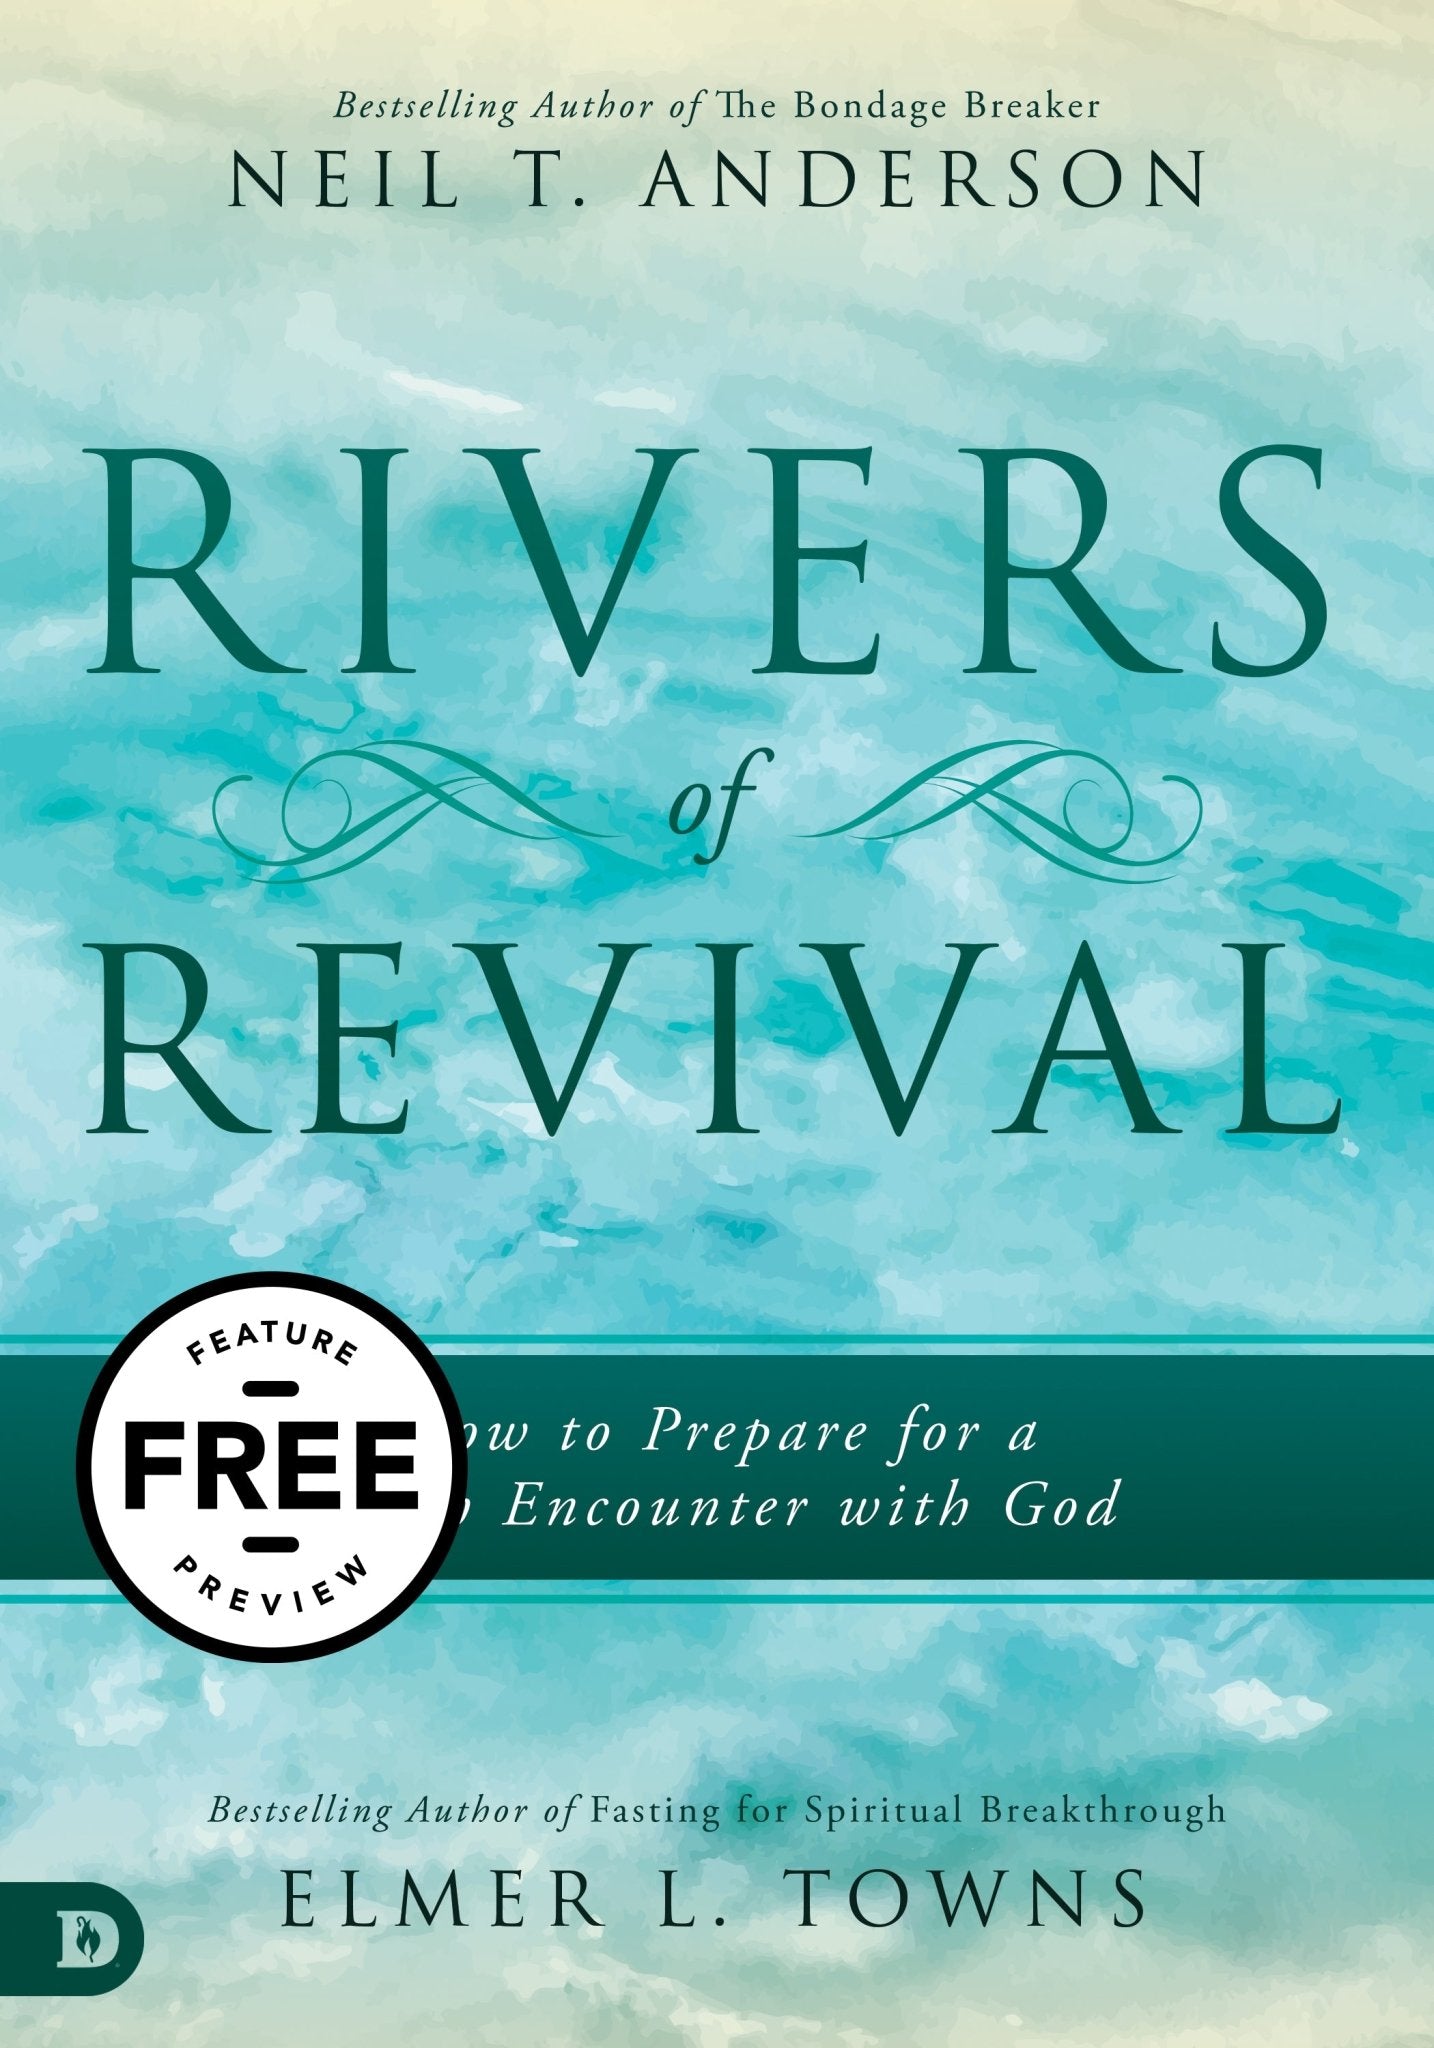 Rivers of Revival Free Feature Message (PDF Download)